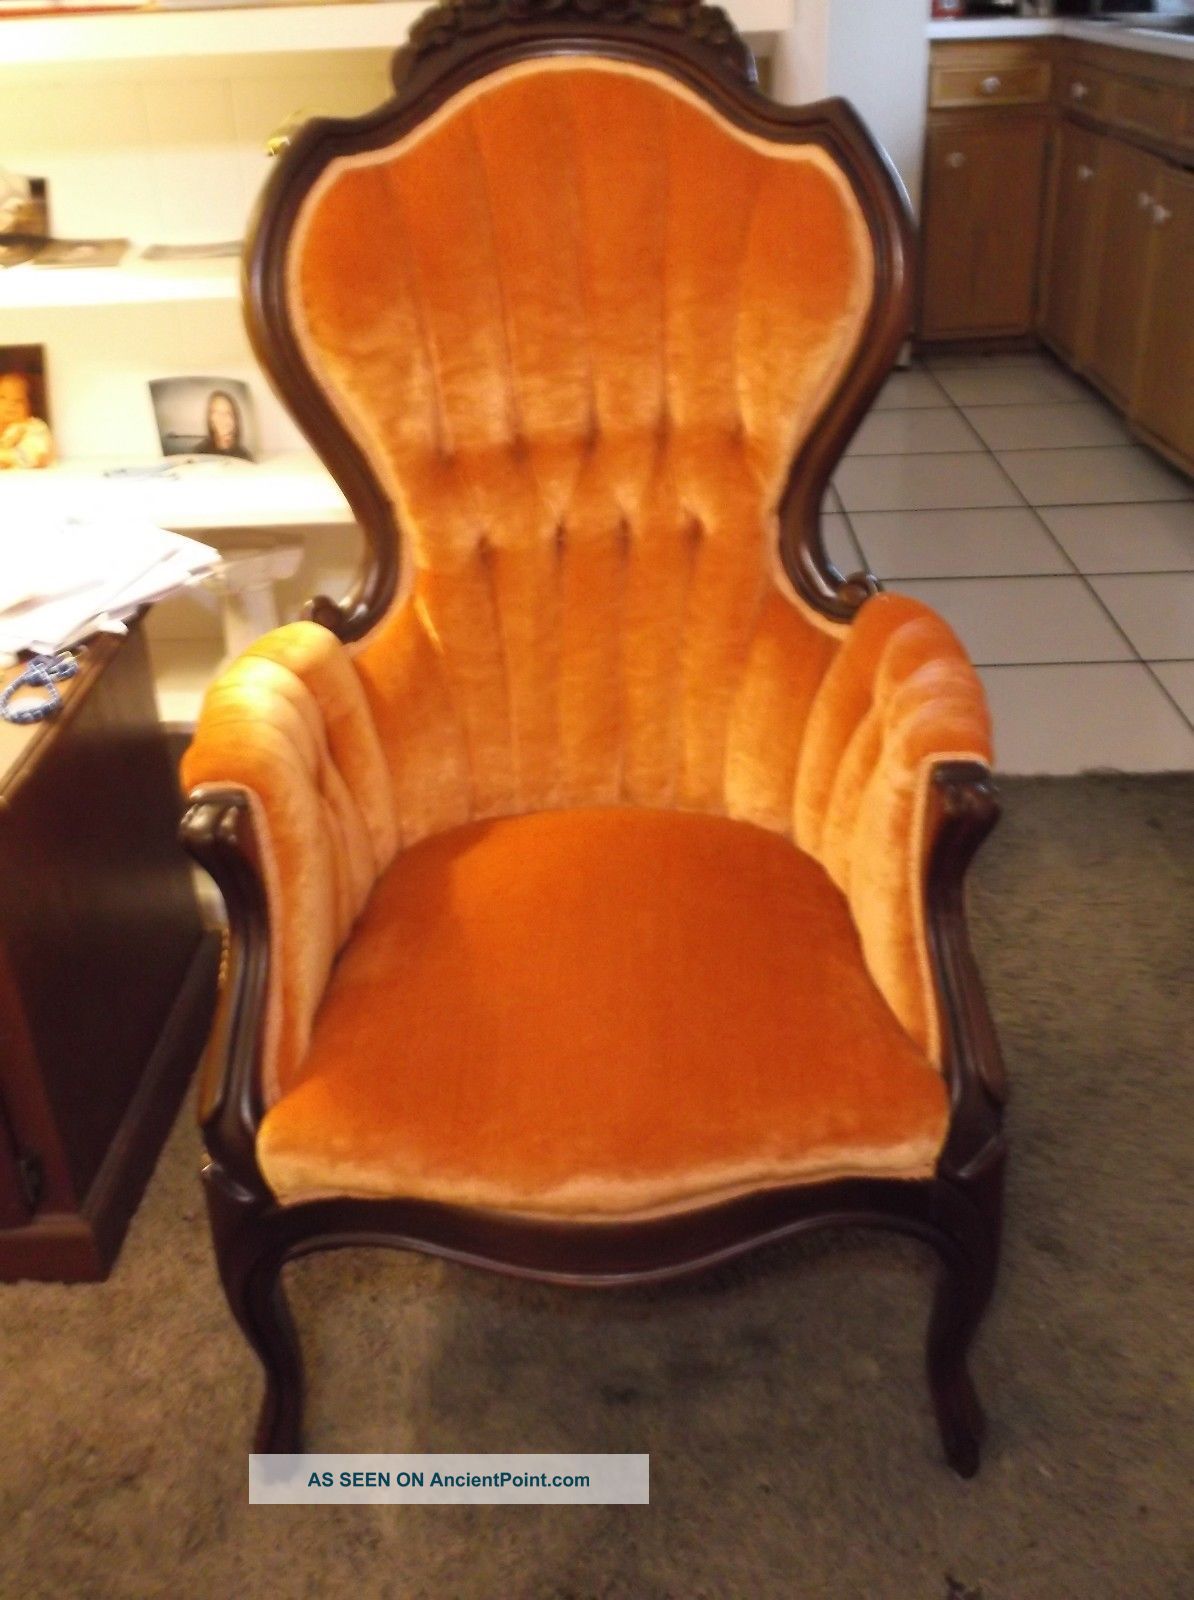 No Tags1900 - 1950 America Orange Velvet Old Victorian Spoon Back Chair 2 1900-1950 photo